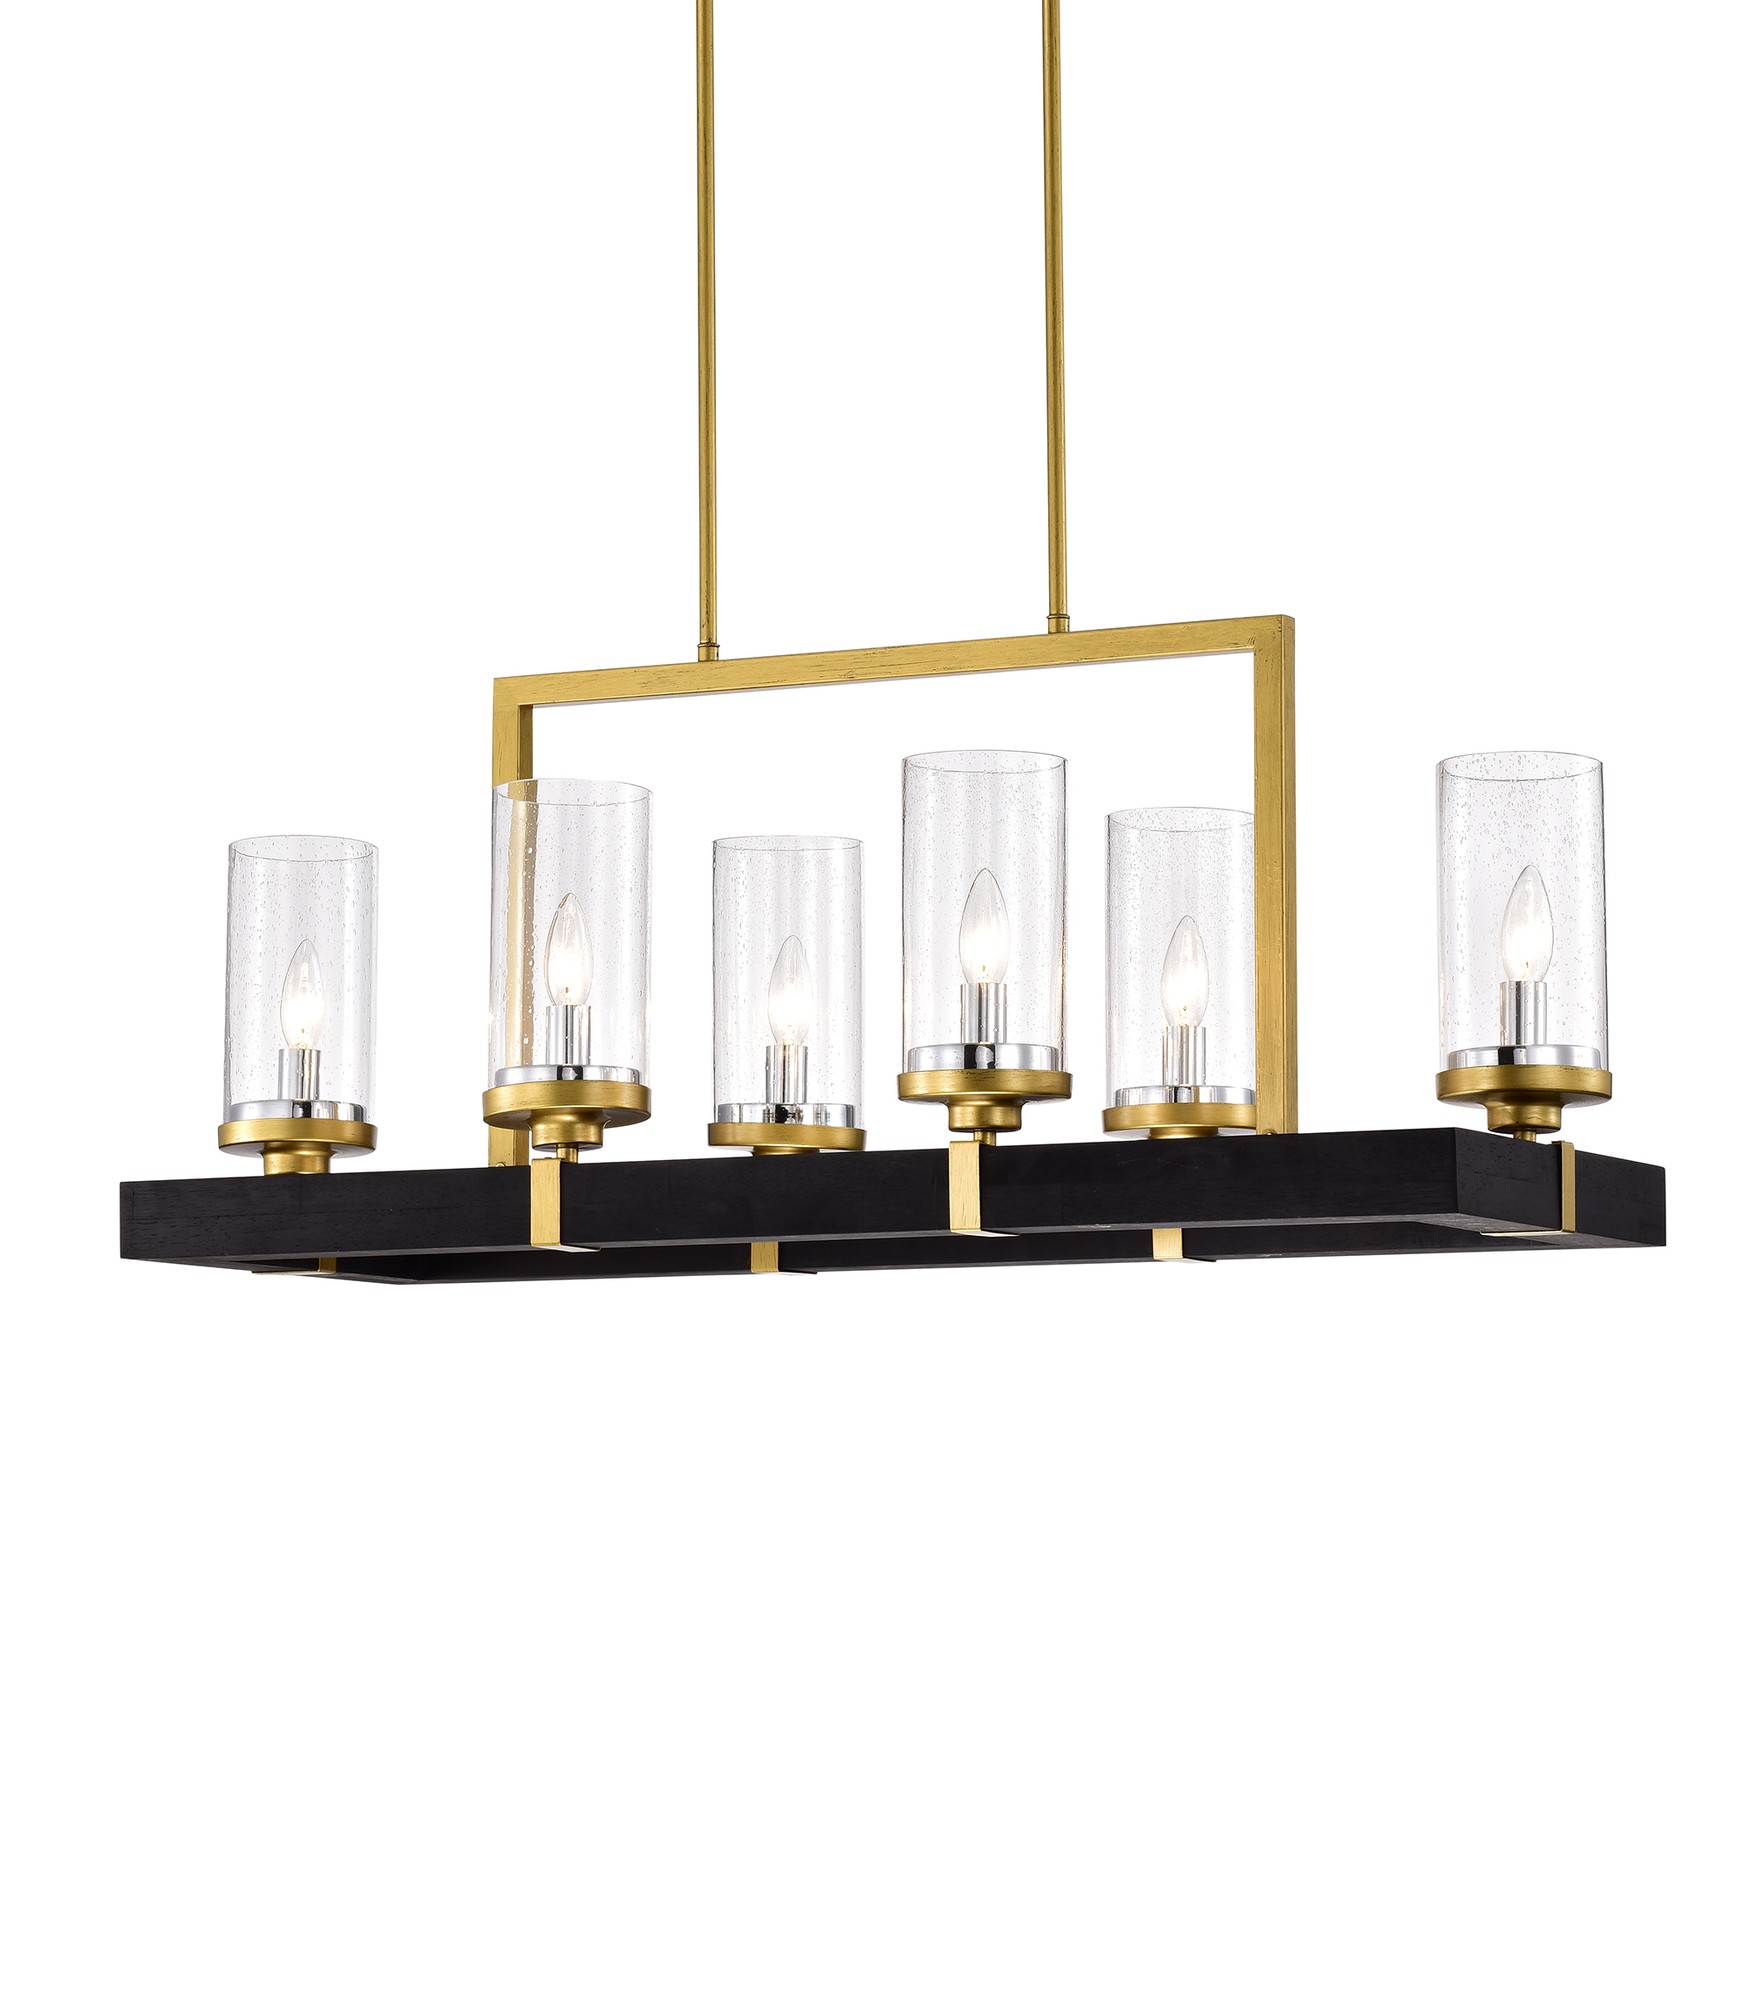 Sonoma Wood & Metal 6-Light Linear Chandelier with Seeded Glass Shades